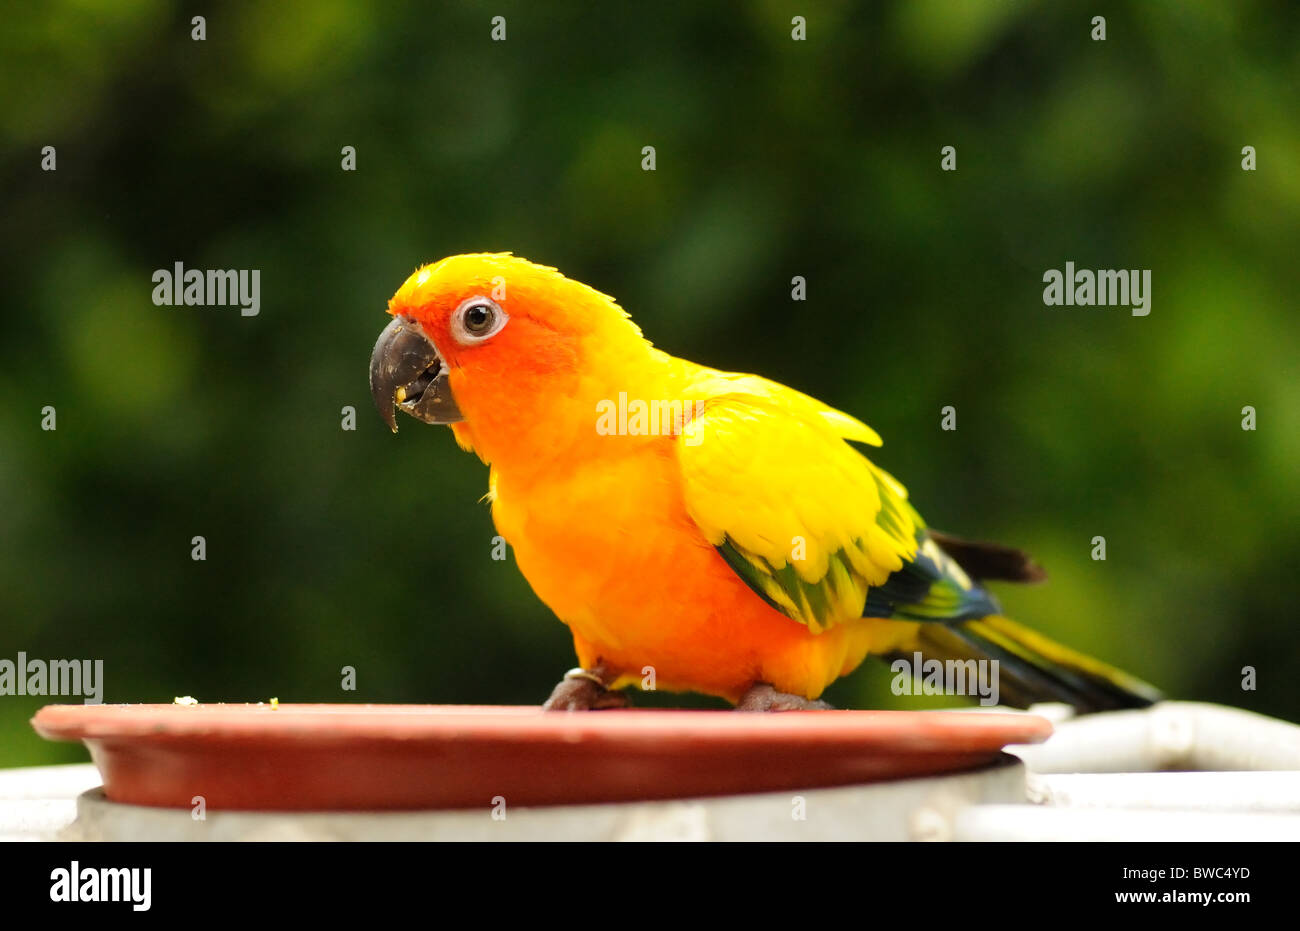 A colorful hungry parrot Stock Photo